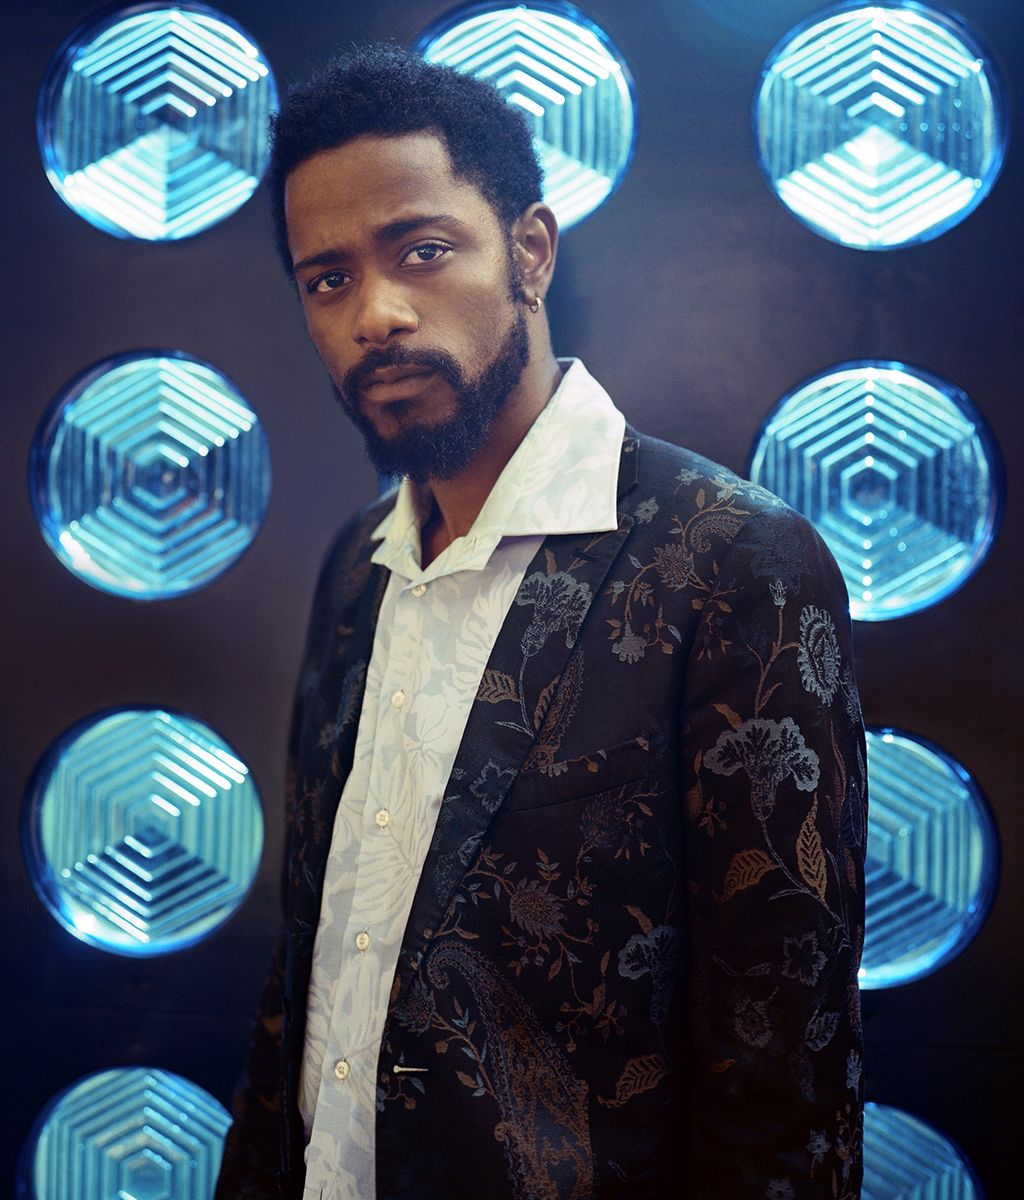 Lakeith Stanfield Has the Range.